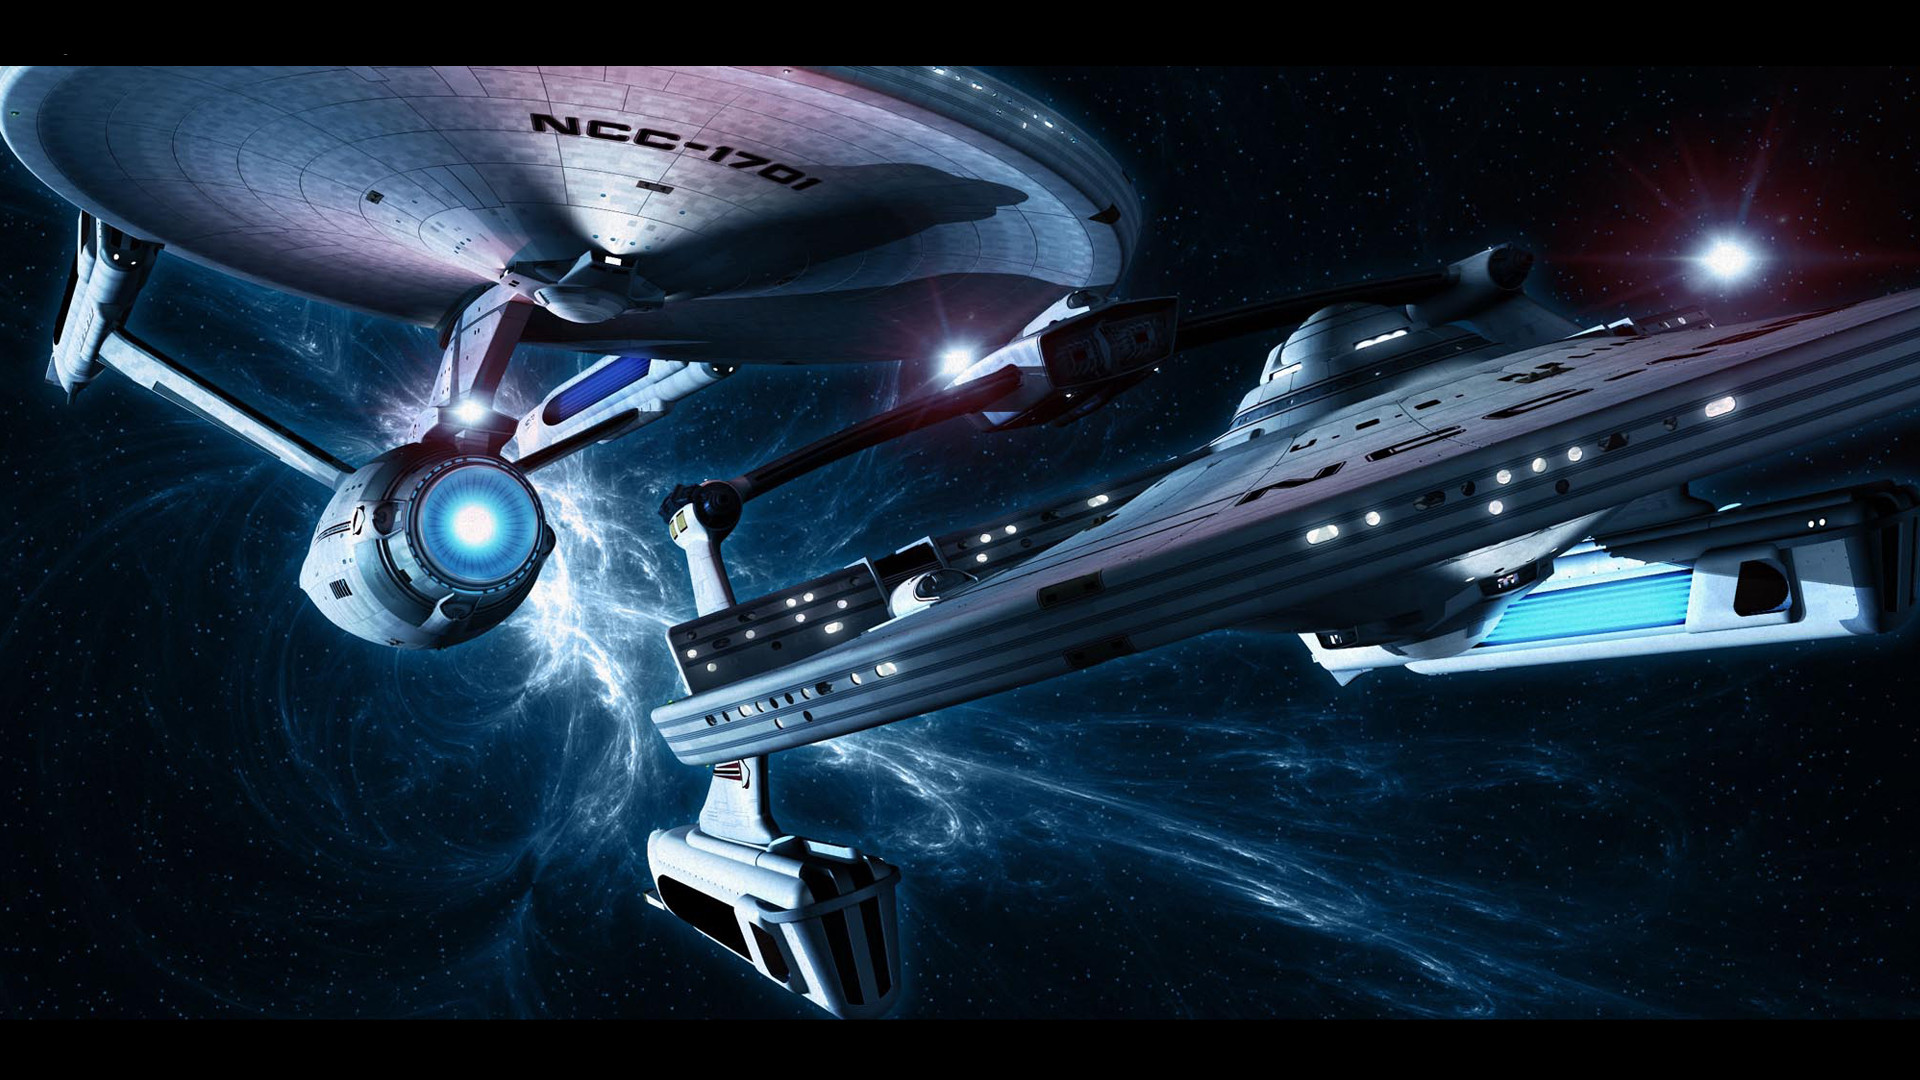 1920x1080 star trek wallpapers hd pictures download hd wallpapers high definition  cool desktop wallpapers for windows apple mac download free 1920Ã1080  Wallpaper HD